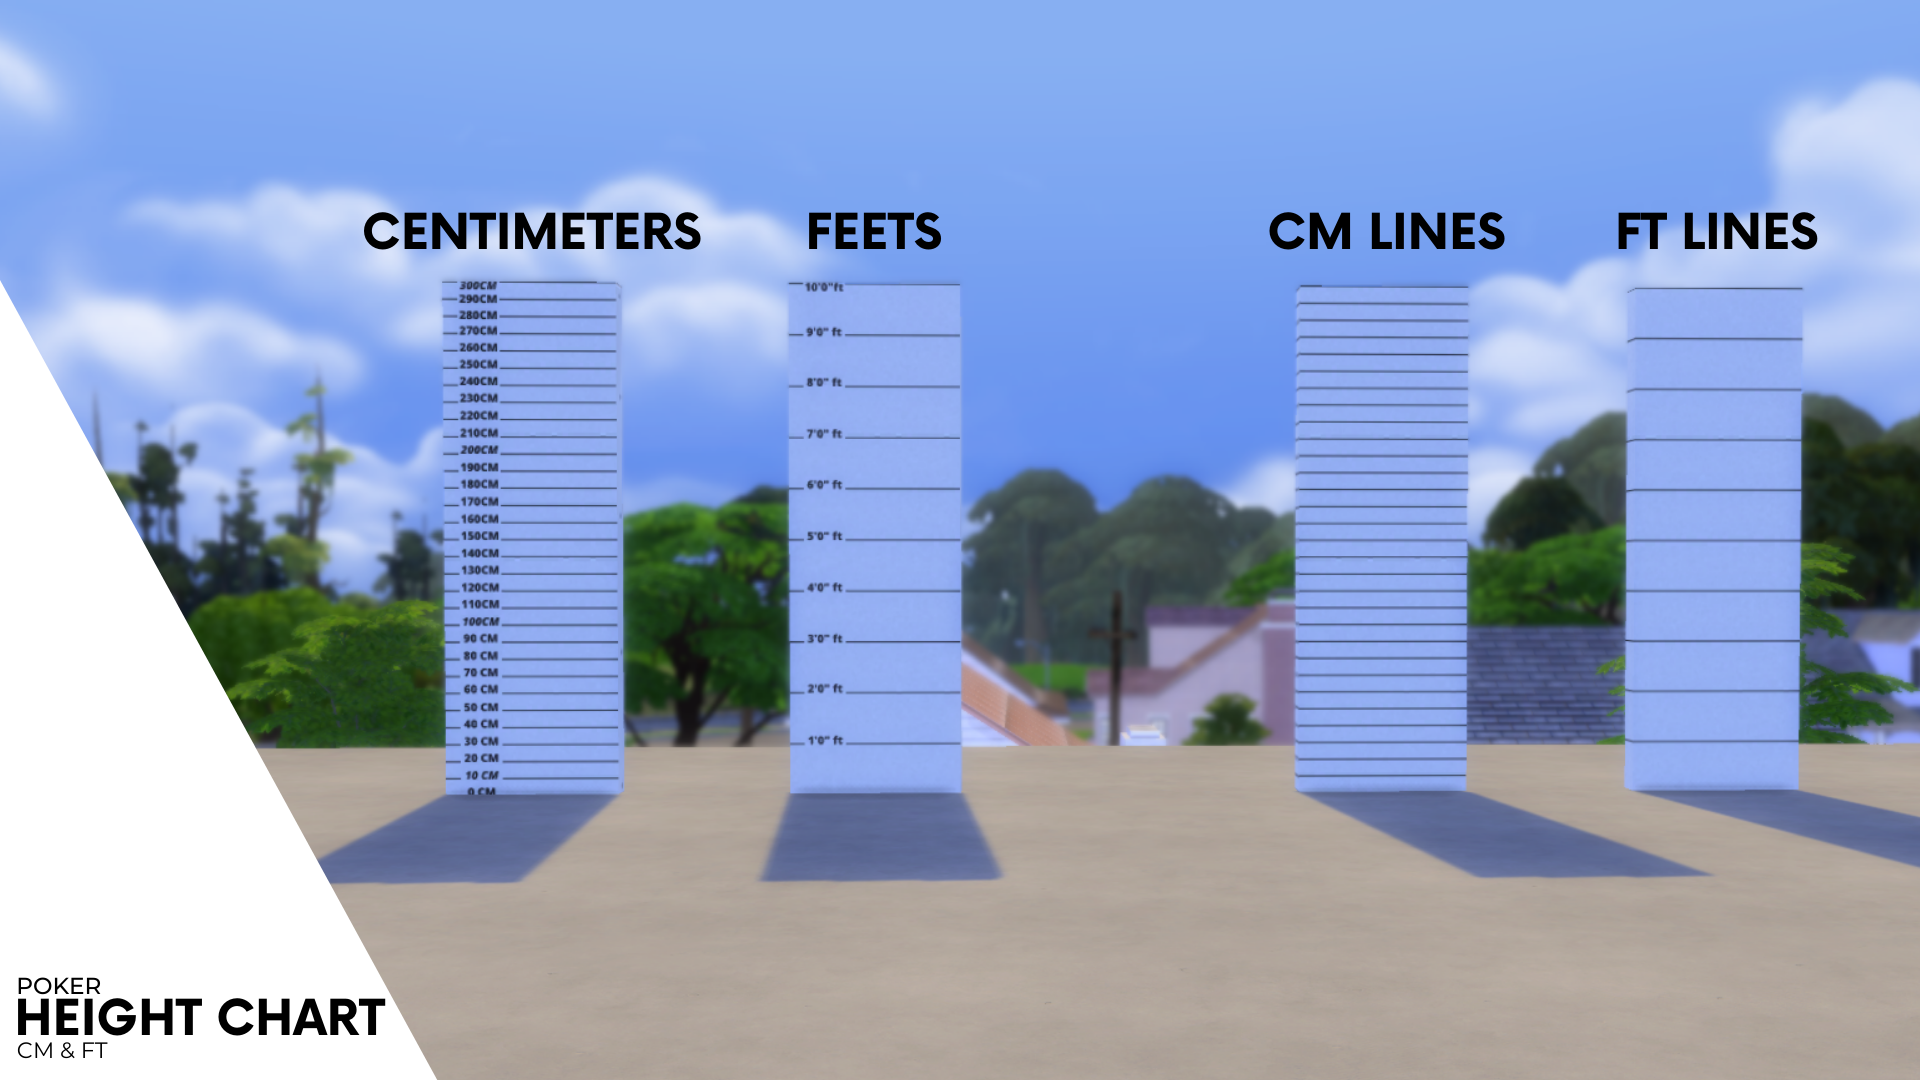 SIMS 4 height Chart. Макет ростомера для фотосессии. SIMS 4 Wall height. SIMS 4 height Chart Decot.